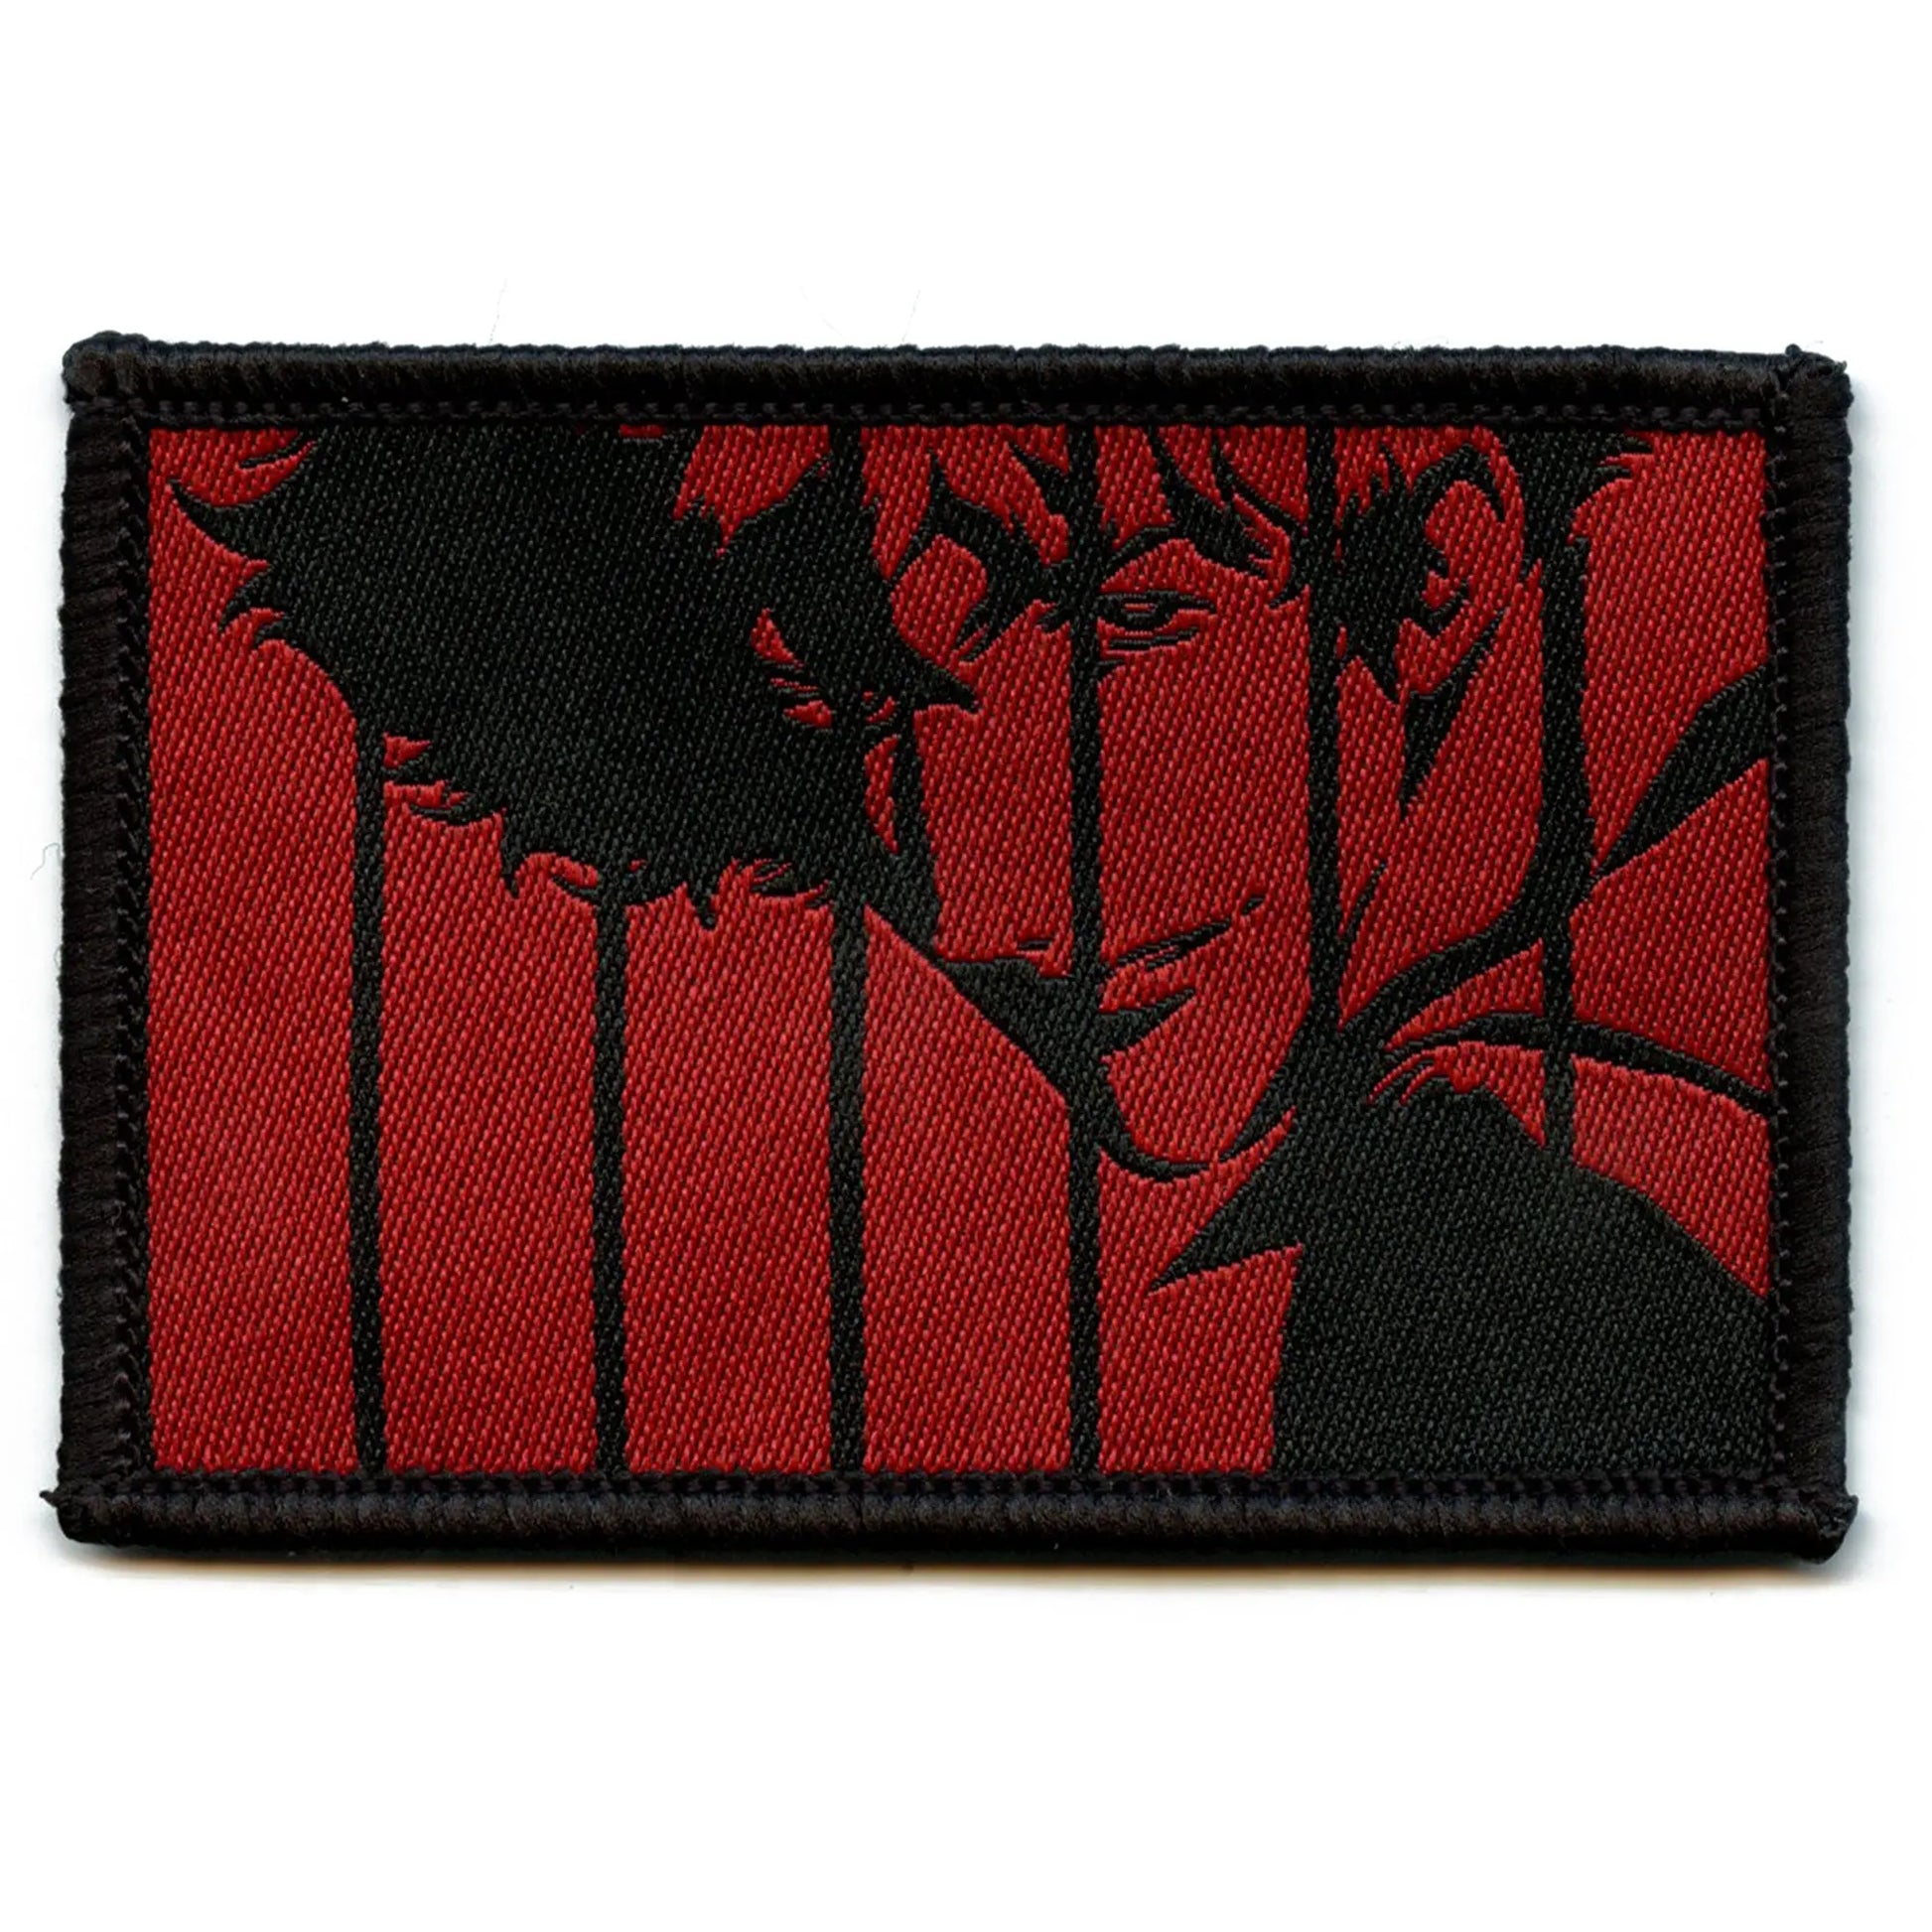 Cowboy Bebop Spike Red Patch Anime Bounty Western Woven Iron On